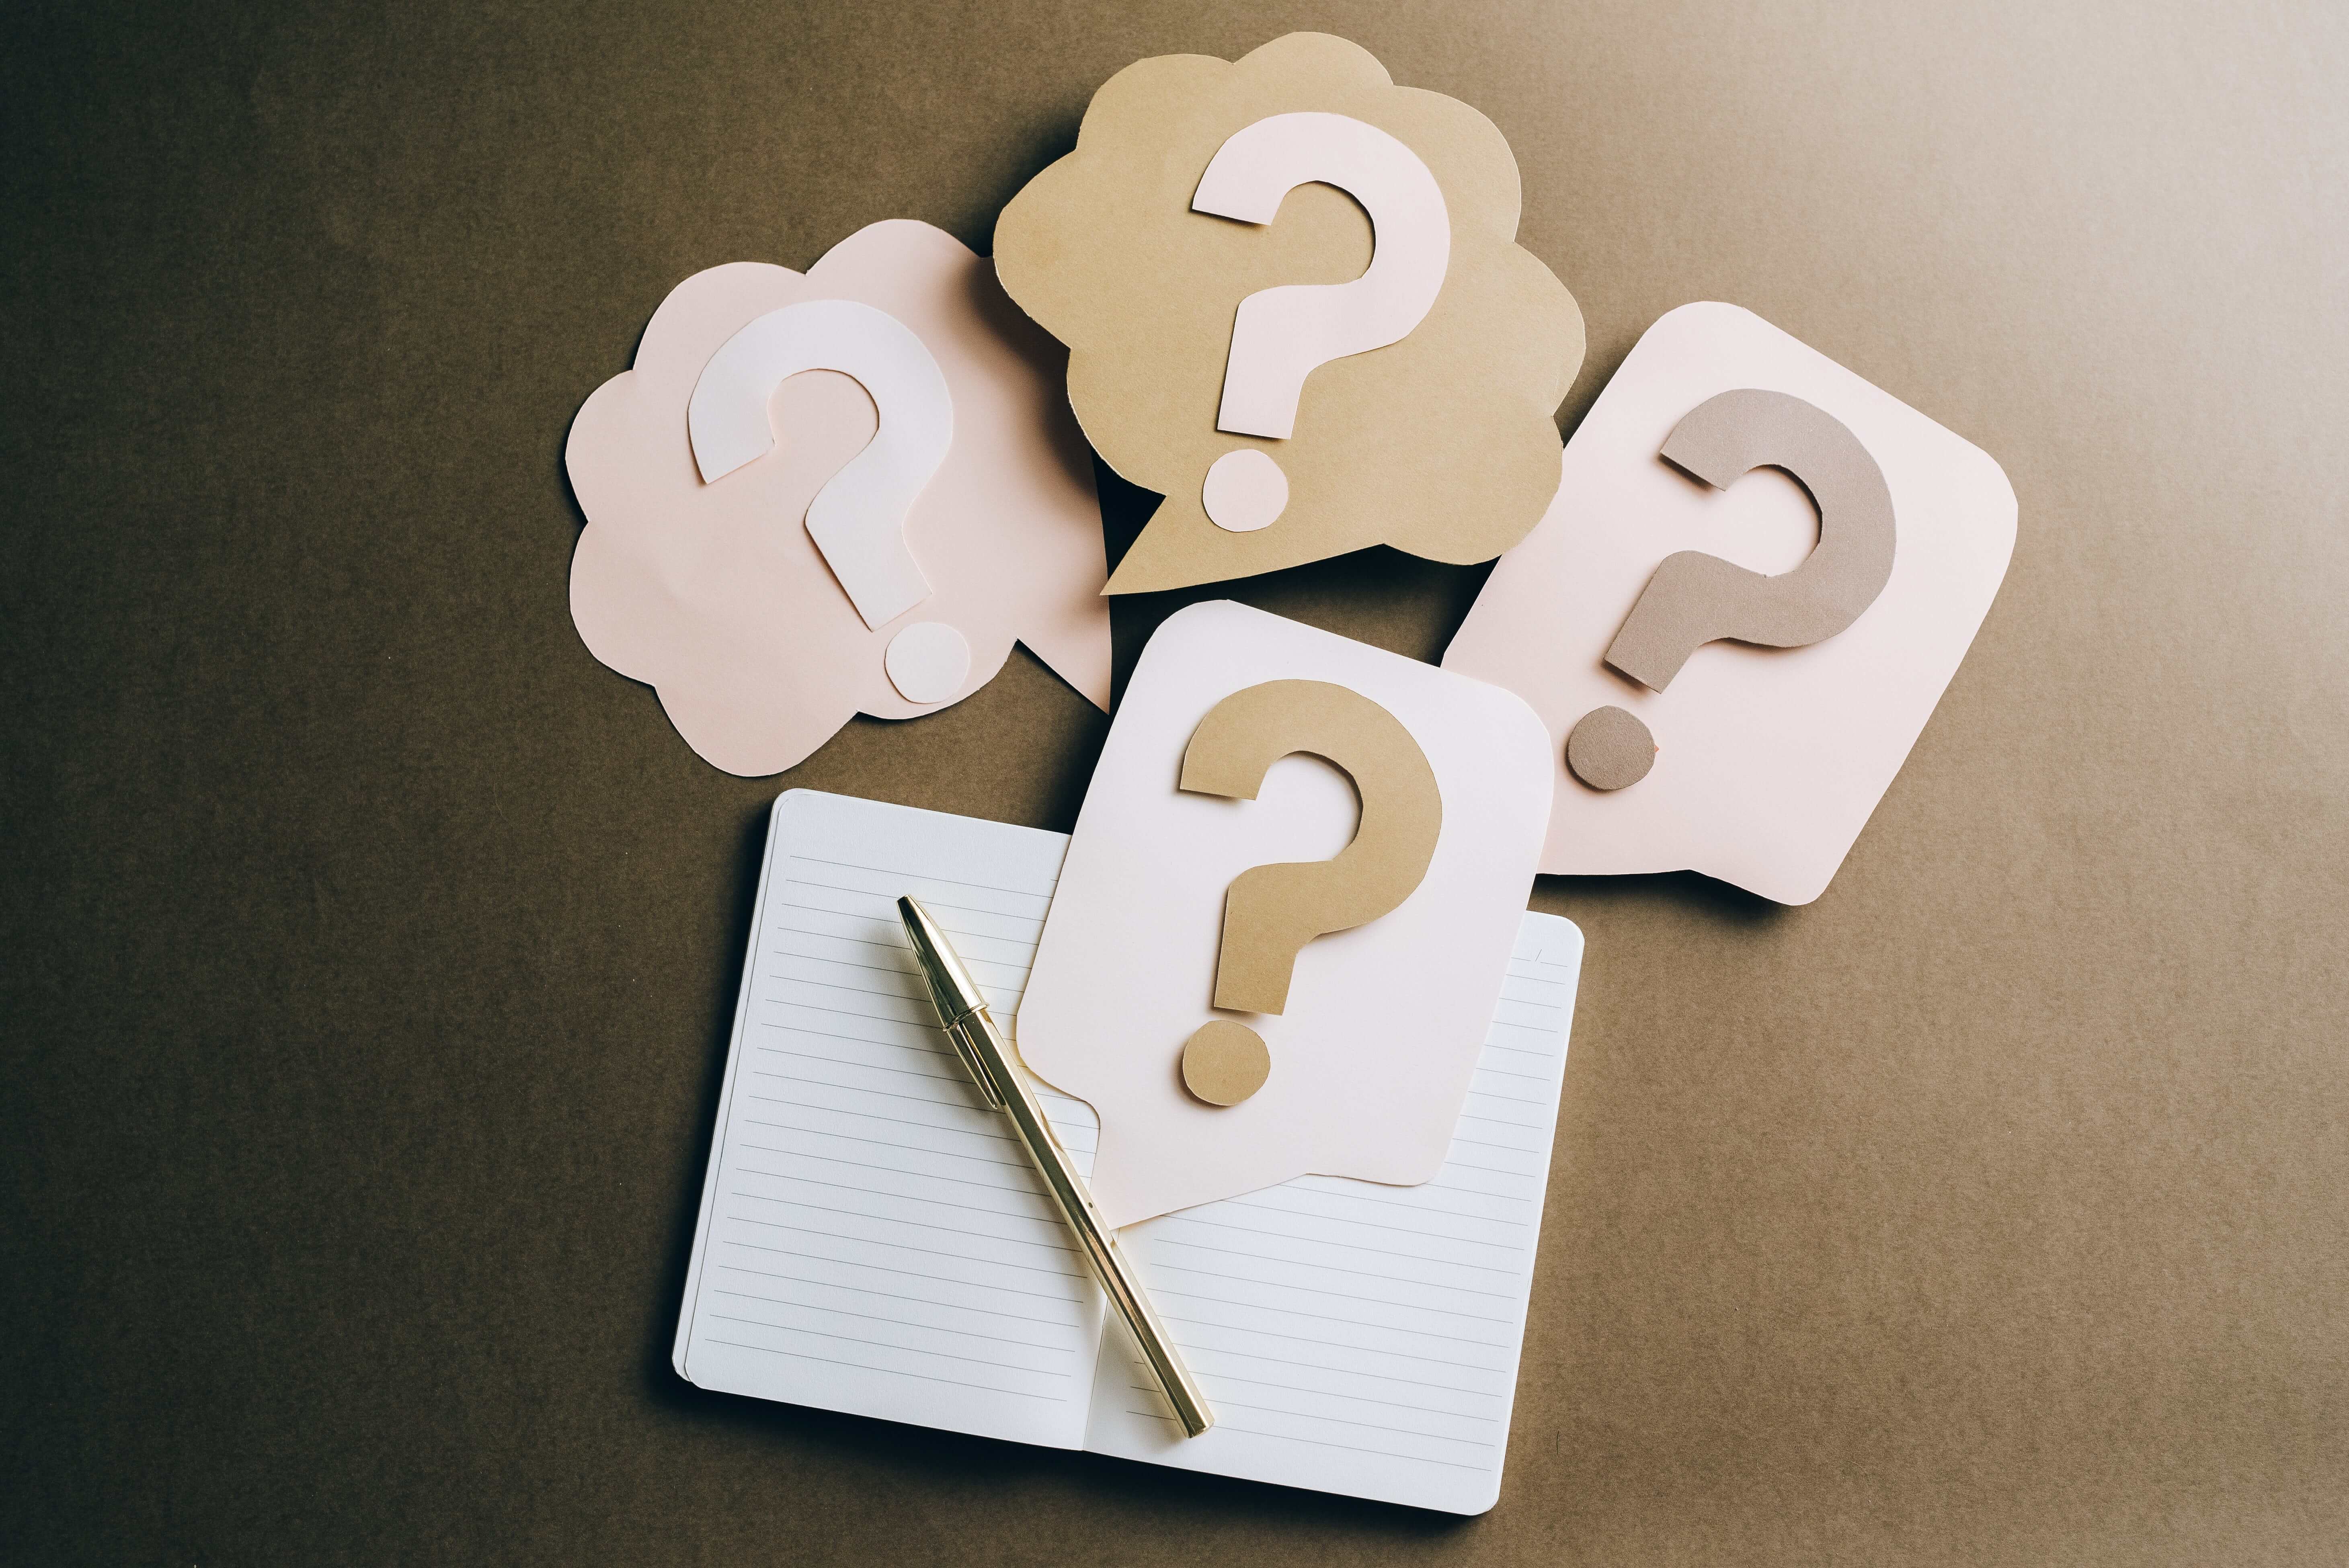 4 Important questions you should be asking your new ERP partner (and what they should ask you)